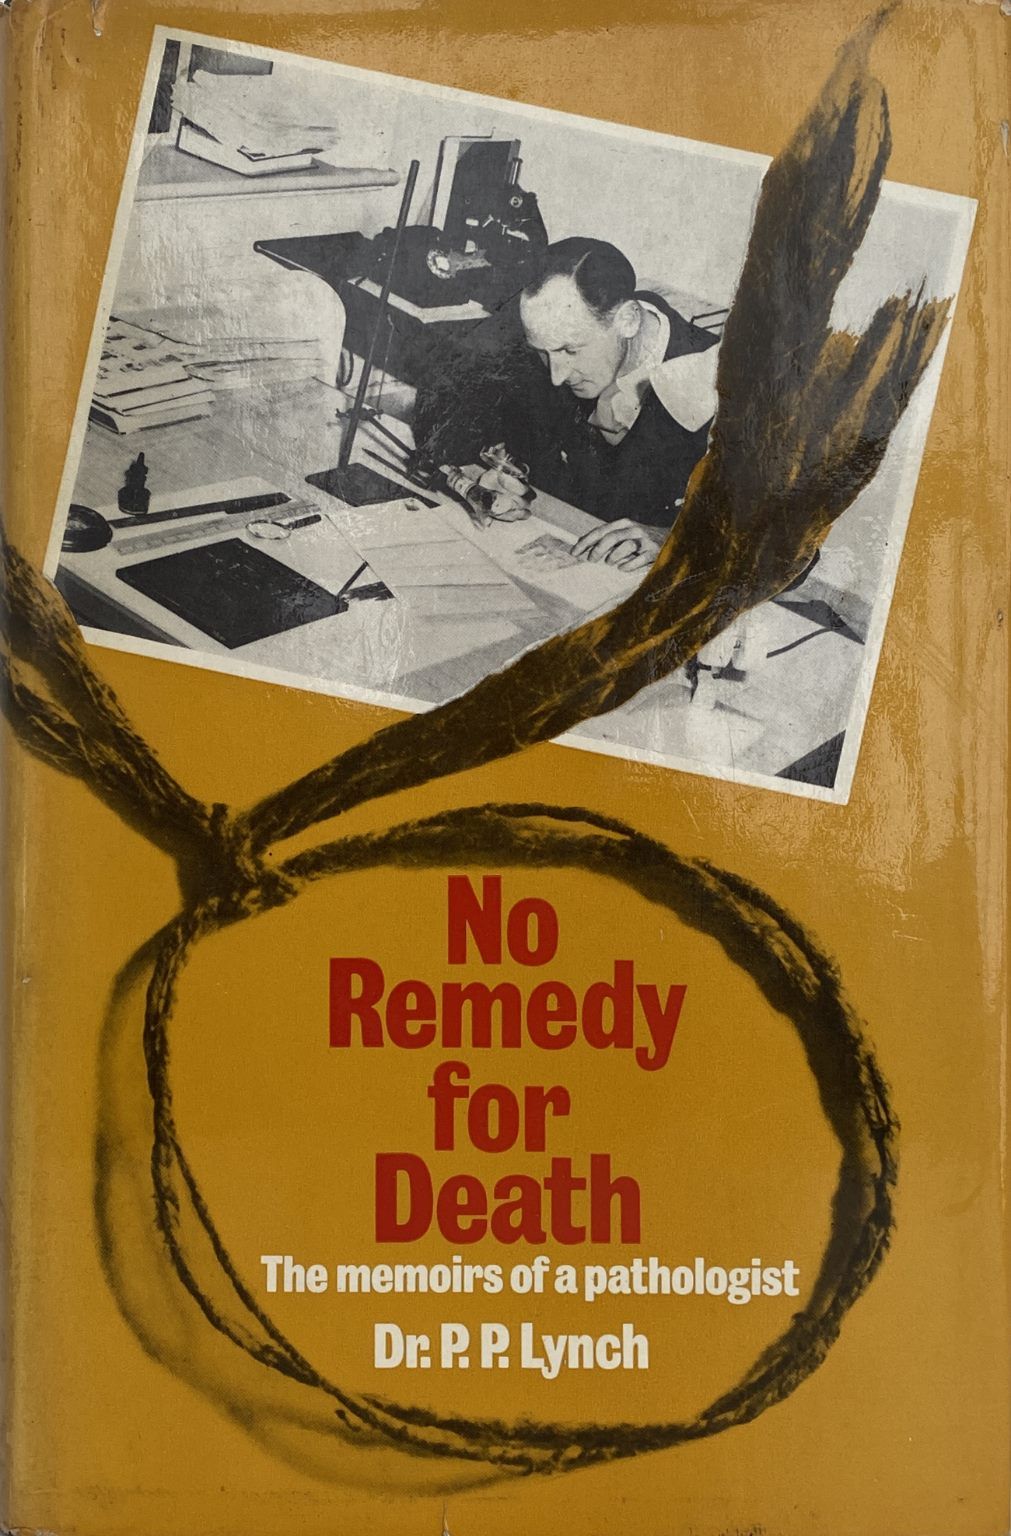 NO REMEDY FOR DEATH: The memoirs of a pathologist